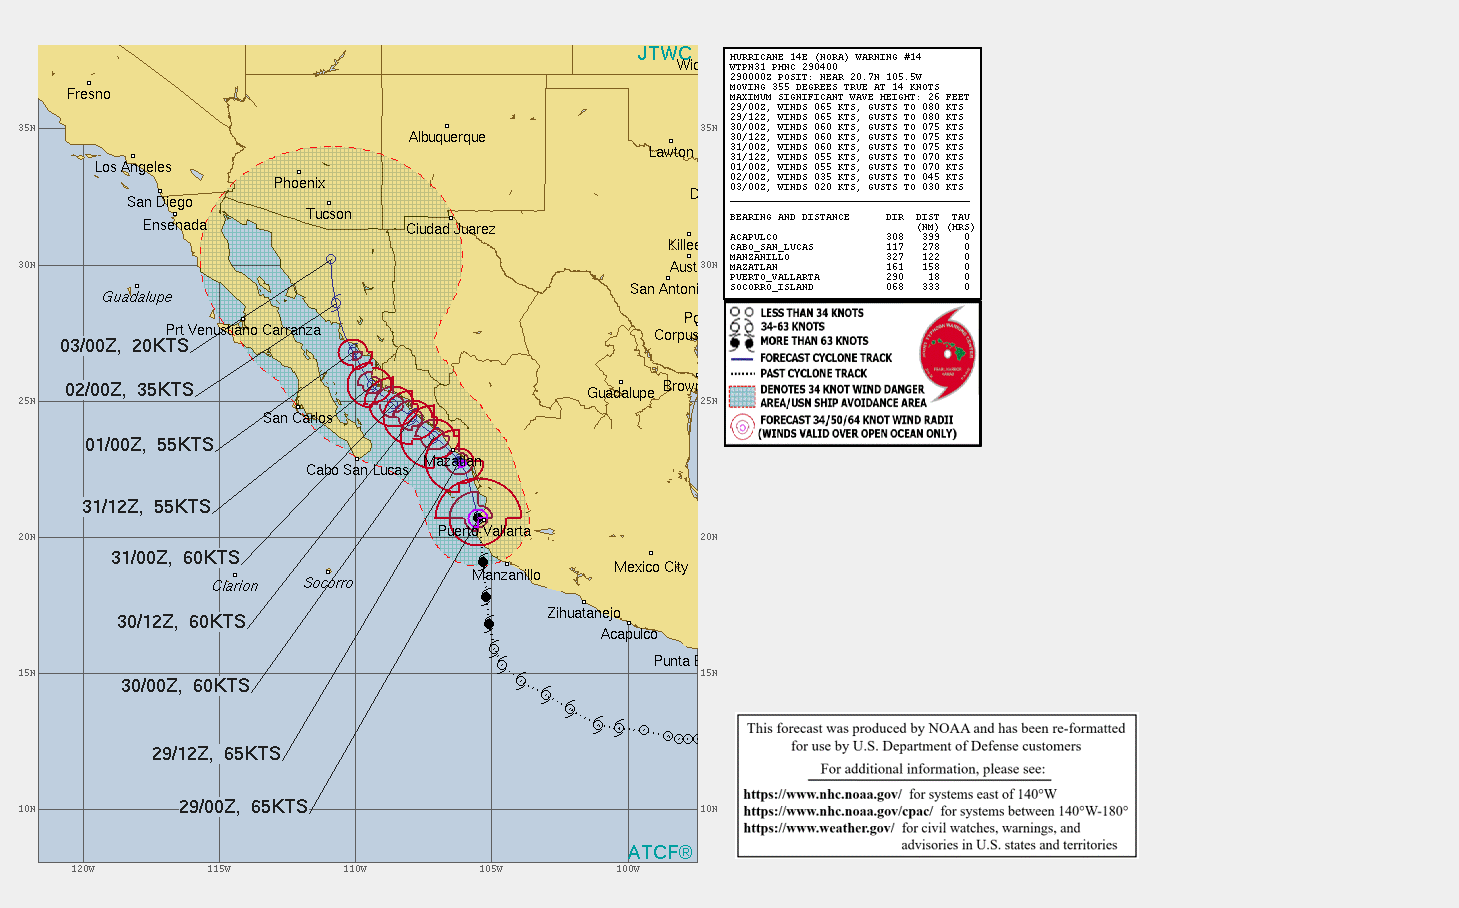 EASTERN PACIFIC. HU 14E(NORA). WARNING 14 ISSUED AT 29/04UTC. 14E TOOK A TEMPORARY TURN TO THE RIGHT AND MADE A BRIEF LANDFALL OVER THE NORTHWESTERN COAST OF JALISCO BUT IS FORECAST TO REMAIN OFFSHORE NEXT FEW DAYS WHILE WEAKENING BELOW 65KNOTS BY 30/00UTC.